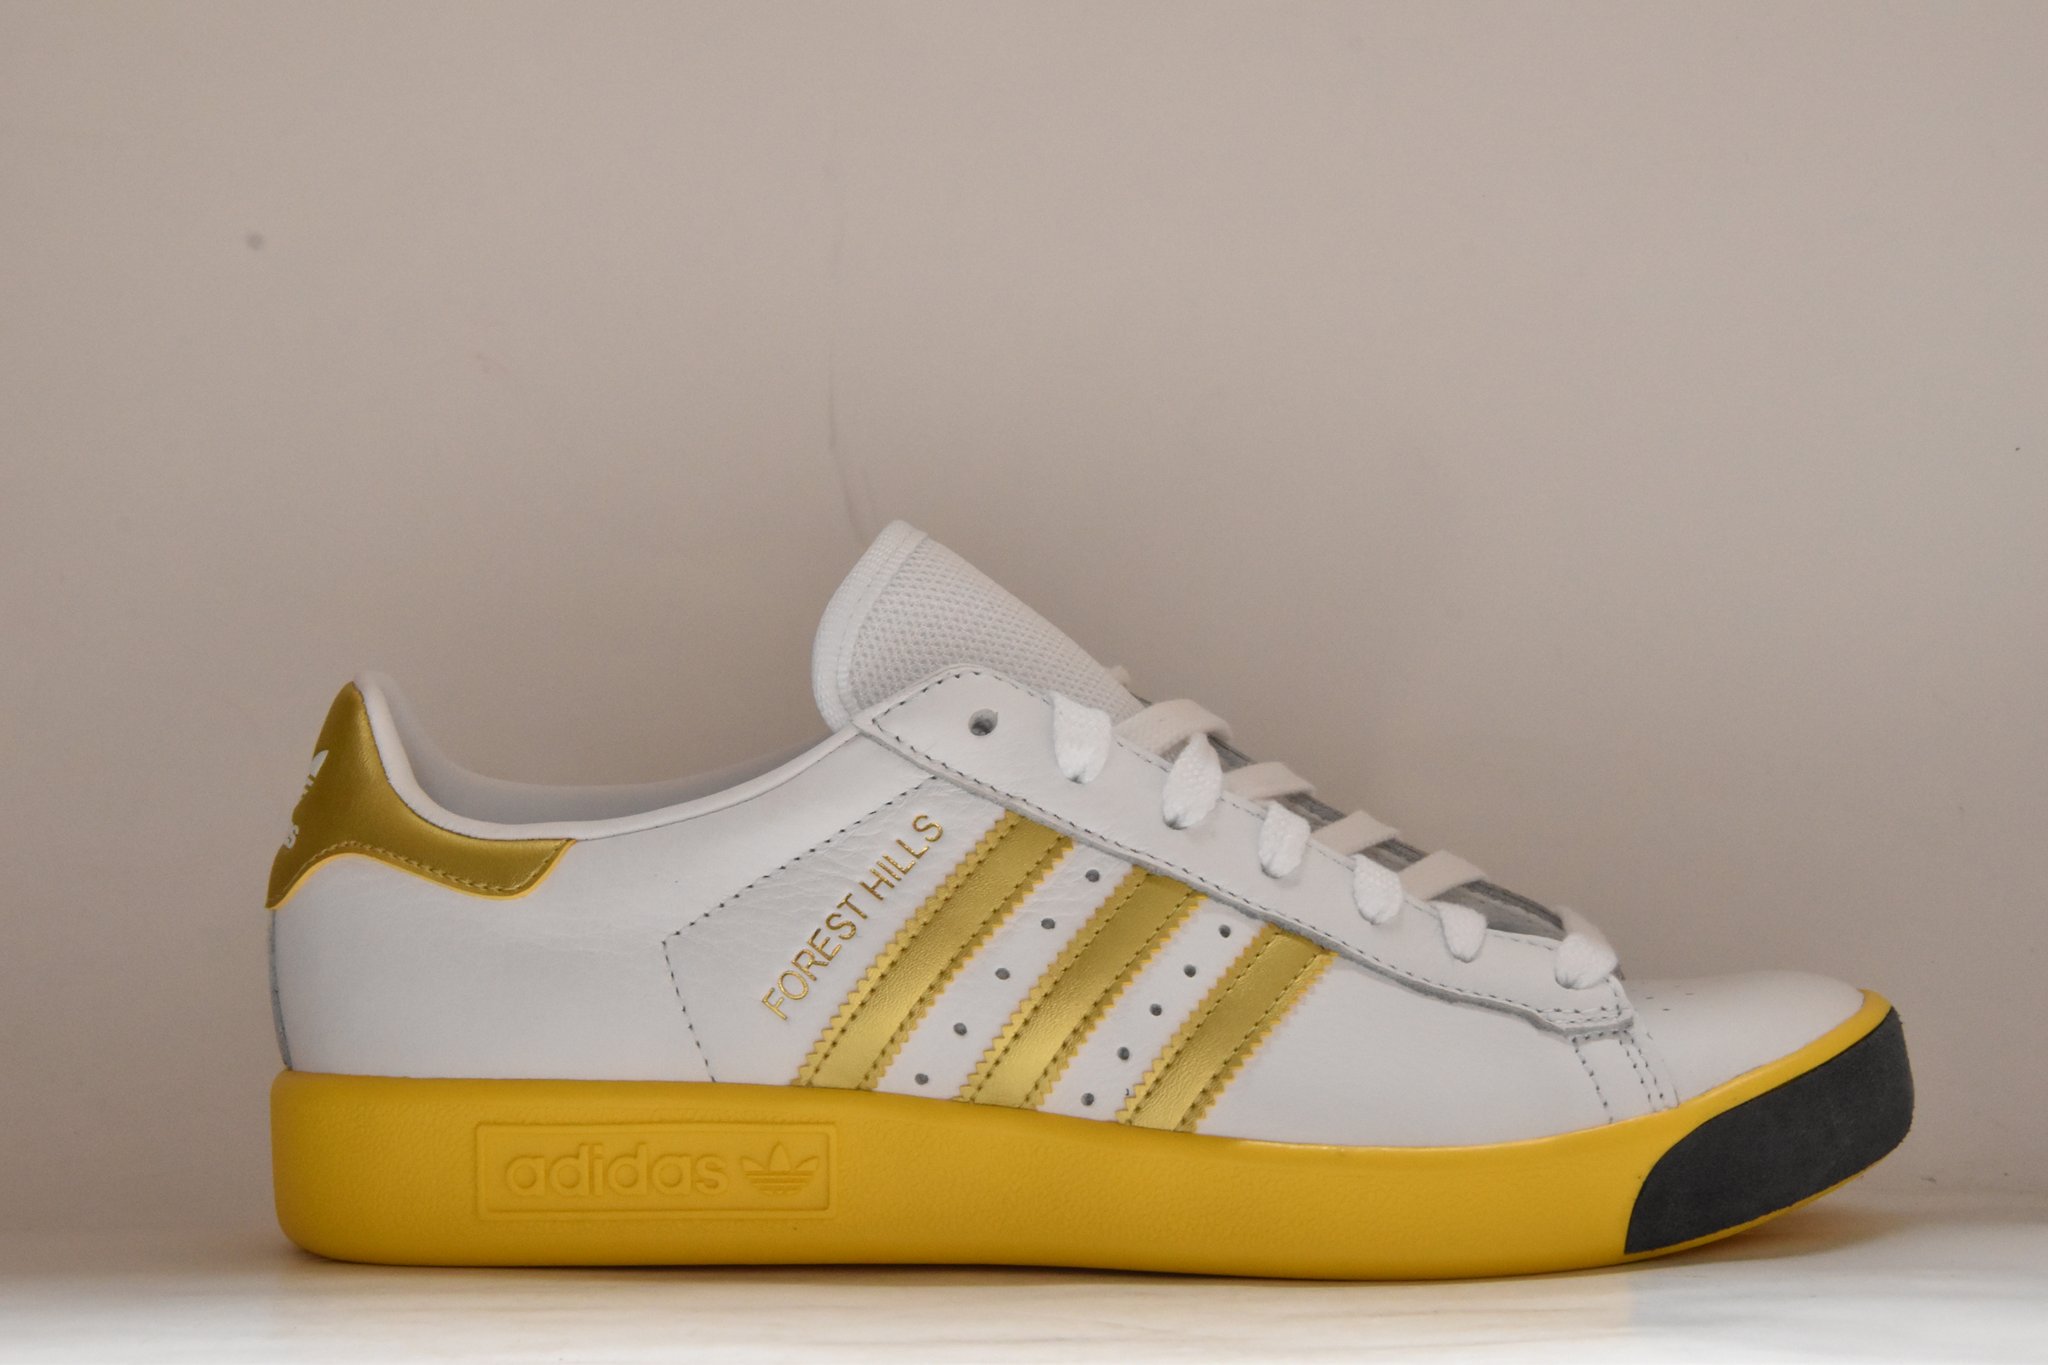 Que agradable Relámpago Ladrillo Dassleresales on Twitter: "NOW AVAILABLE: Adidas Forest Hills  White/Sunshine- sizes 8 and 8.5. £59.99 https://t.co/pSOeJhdHI0  https://t.co/QfZqDSi4Jp" / Twitter